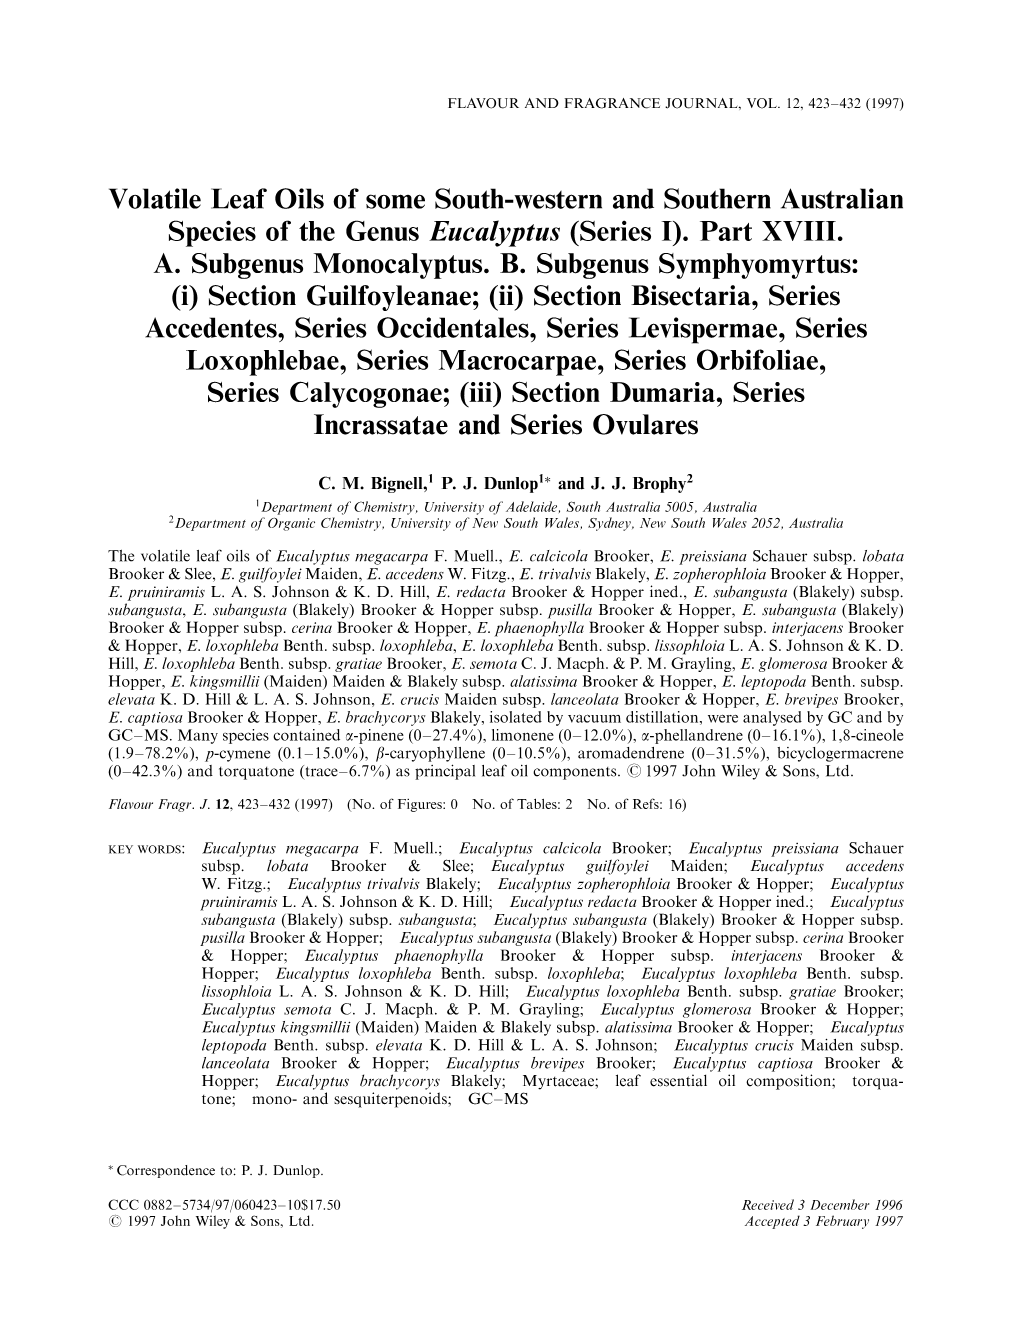 Volatile Leaf Oils of Some South-Western and Southern Australian Species of the Genus Eucalyptus (Series I)